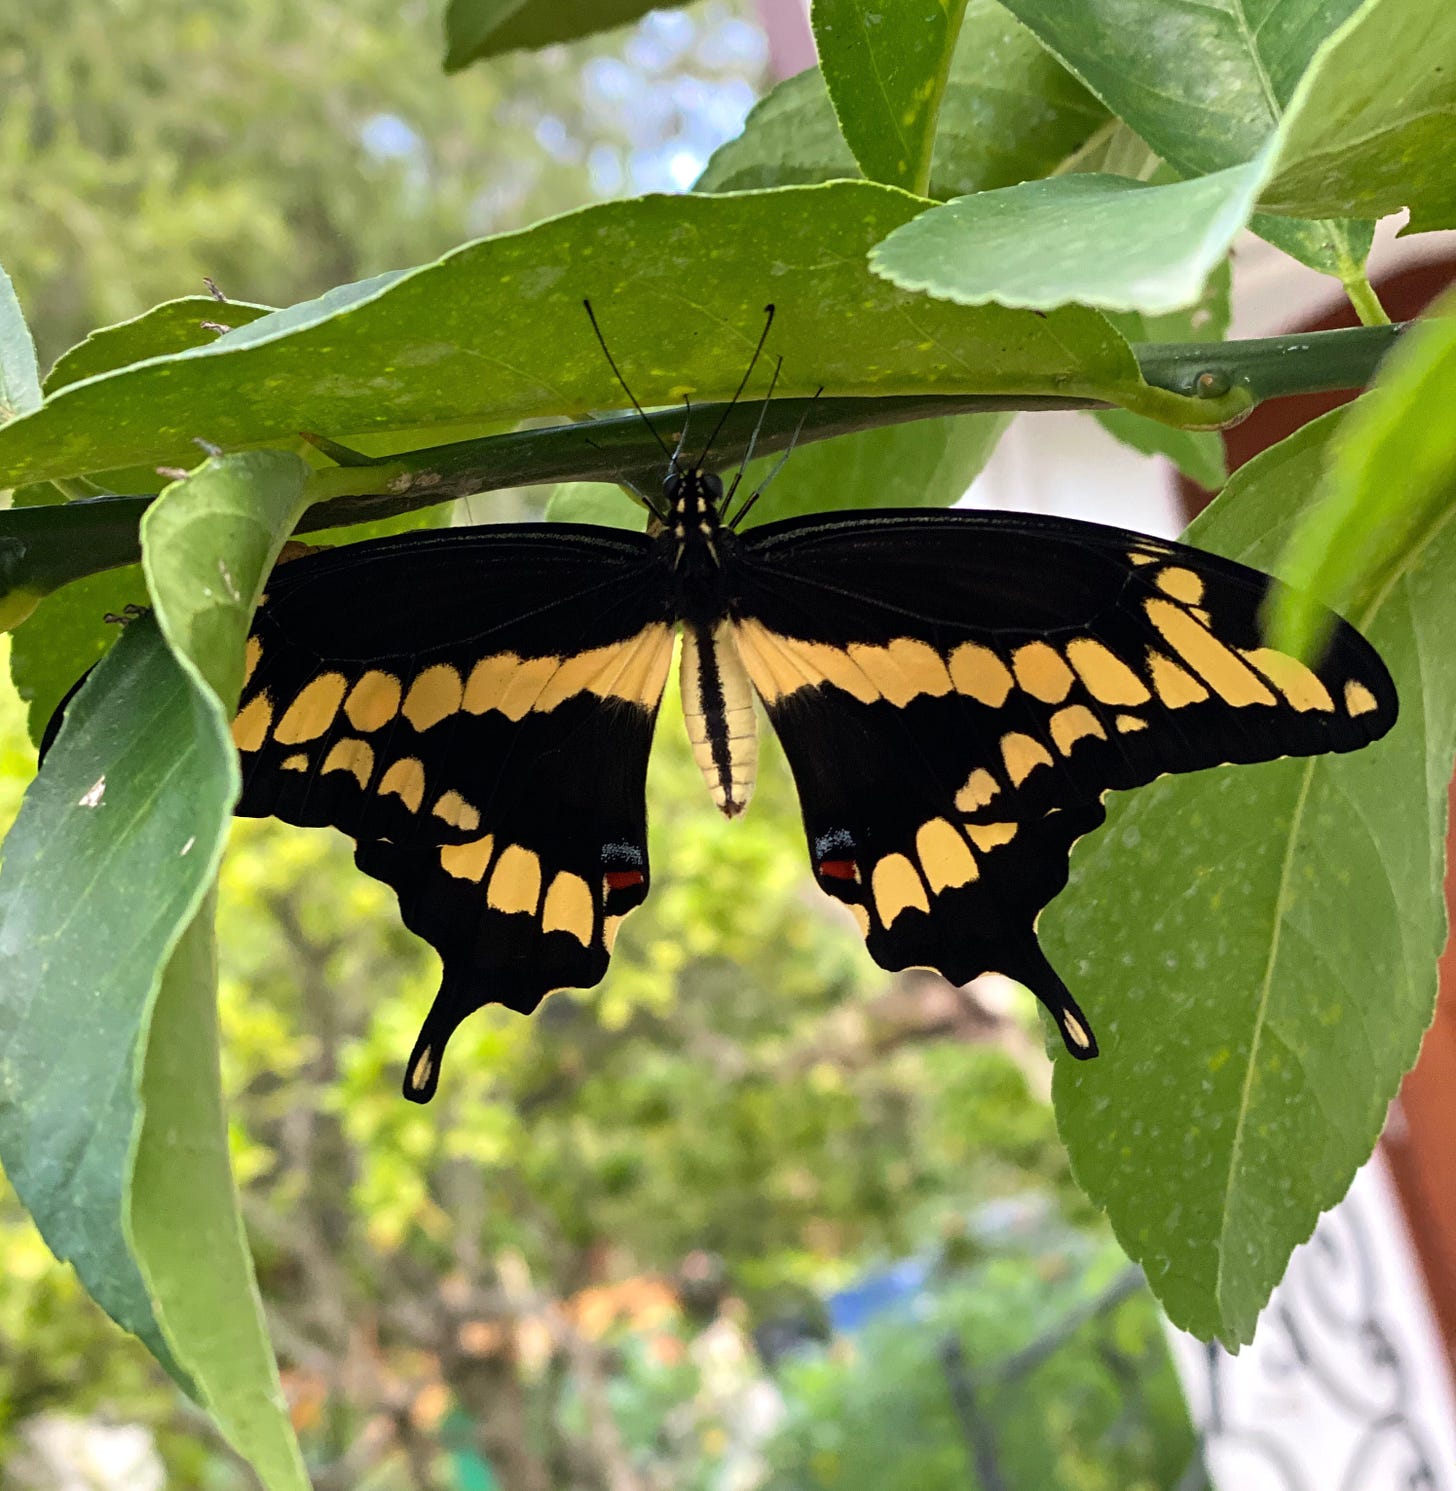 A giant swallowtail butterfly hardens its wings in the breeze after hatching from a chrysalis on the key lime tree.